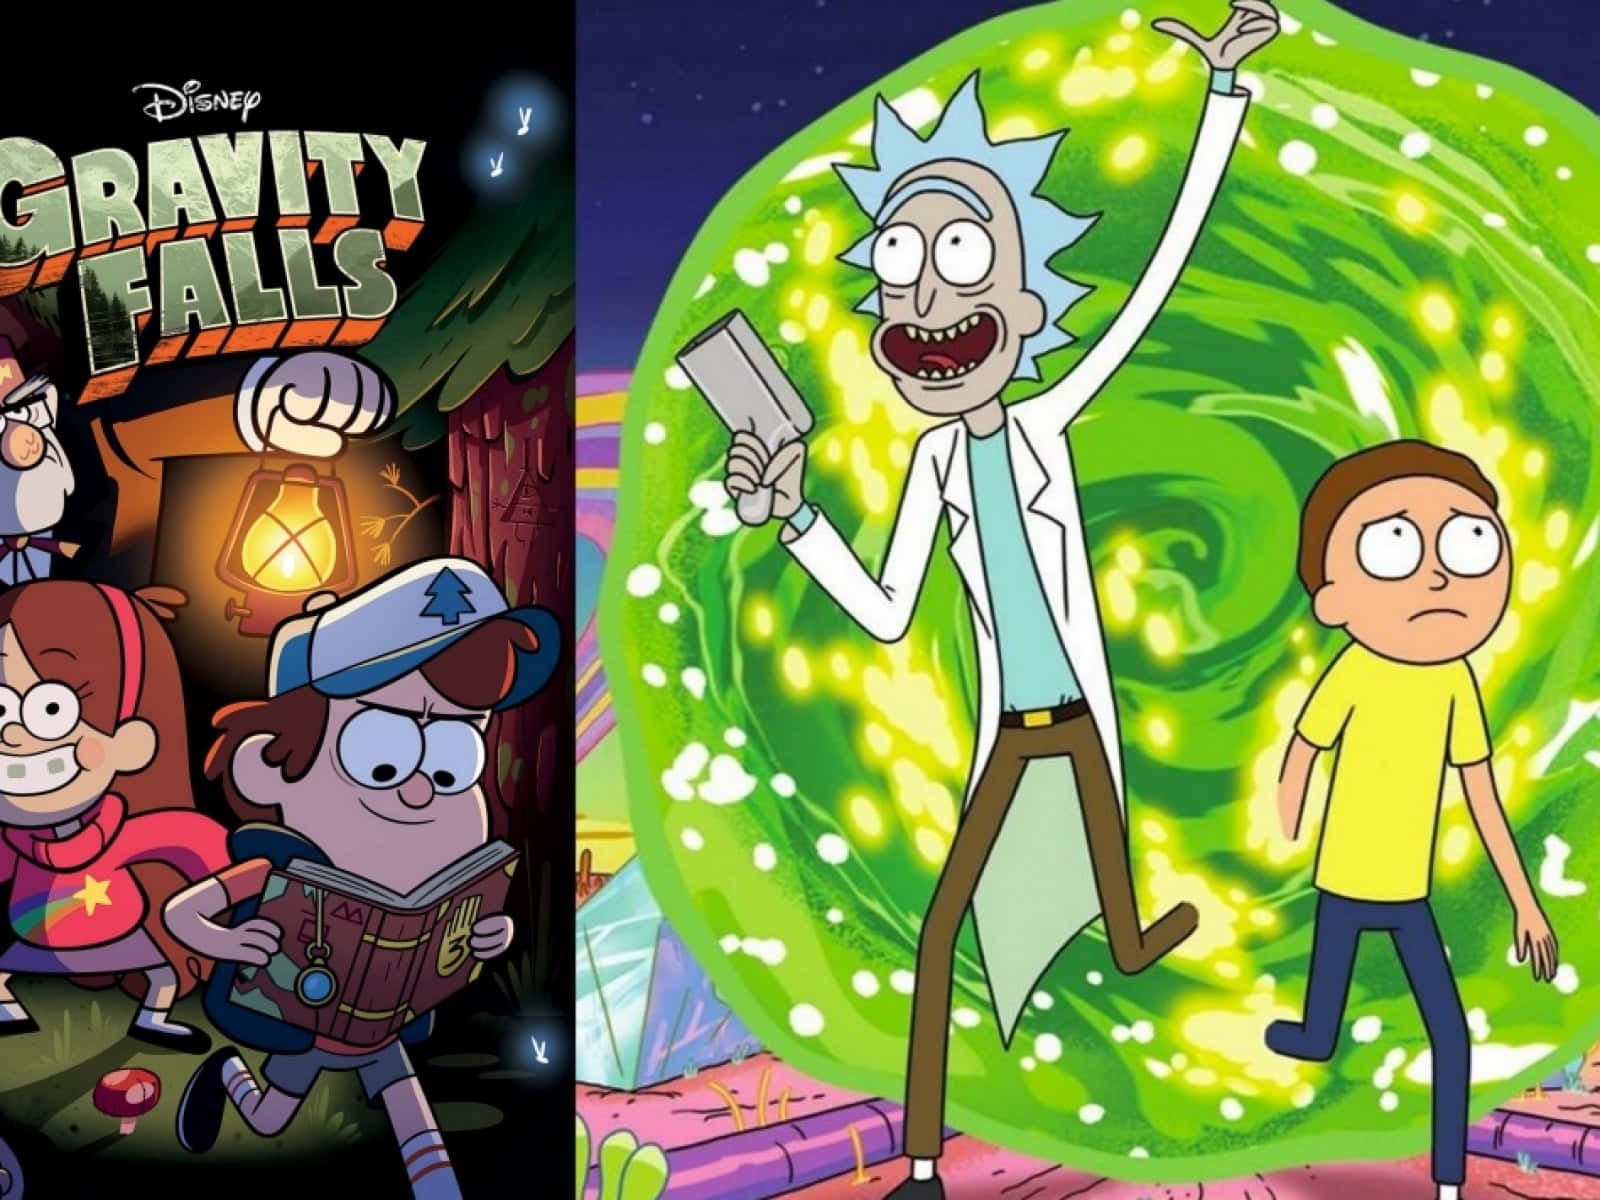 Welcome to Gravity Falls!